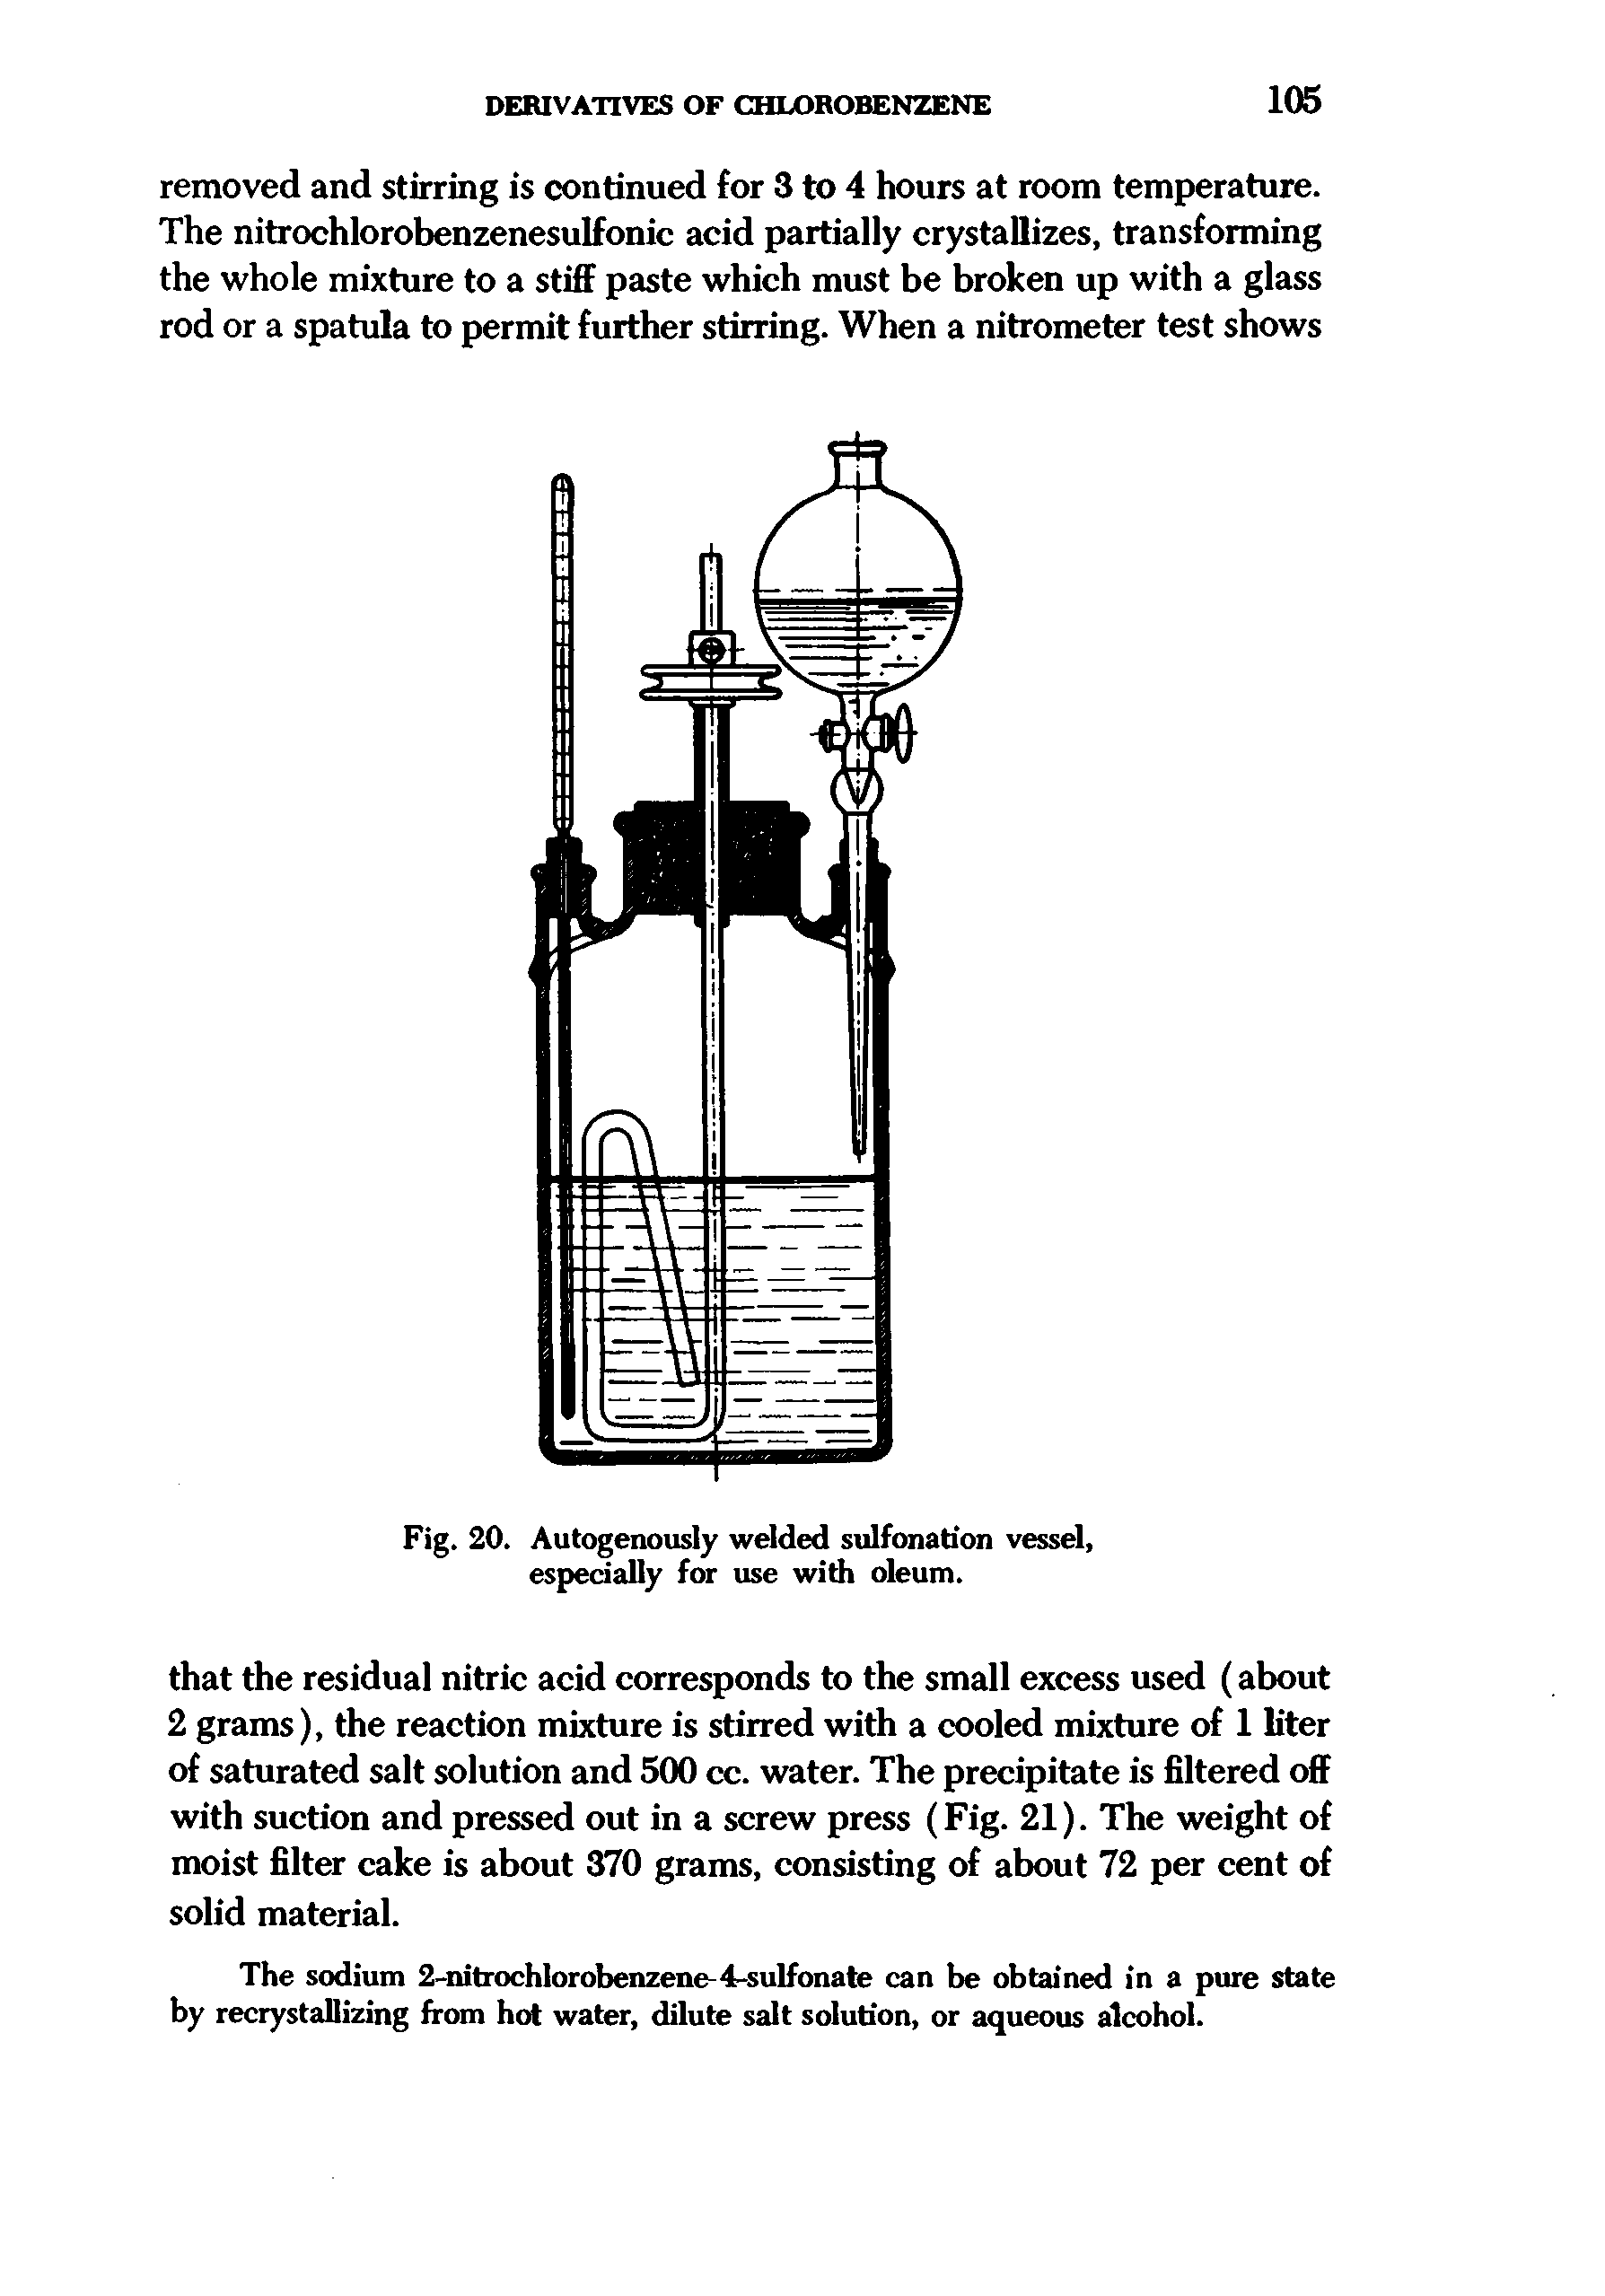 Fig. 20. Autogenously welded sulfonab on vessel, especially for use with oleum.